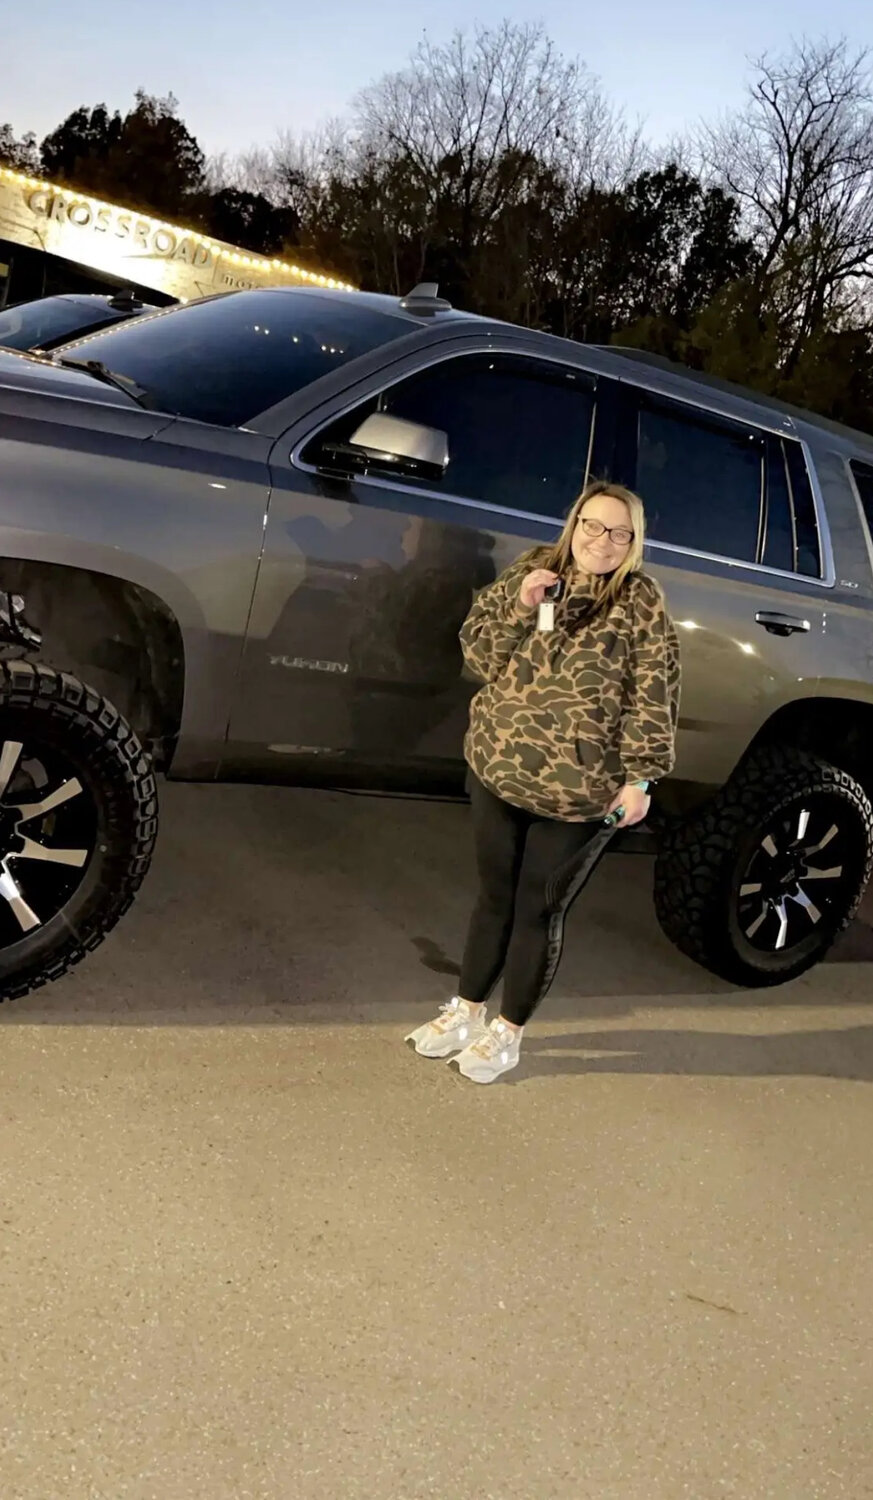 A picture Rast uploaded to various social media sites allegedly showcasing her in front of the 2020 GMC Yukon that was reported stolen.